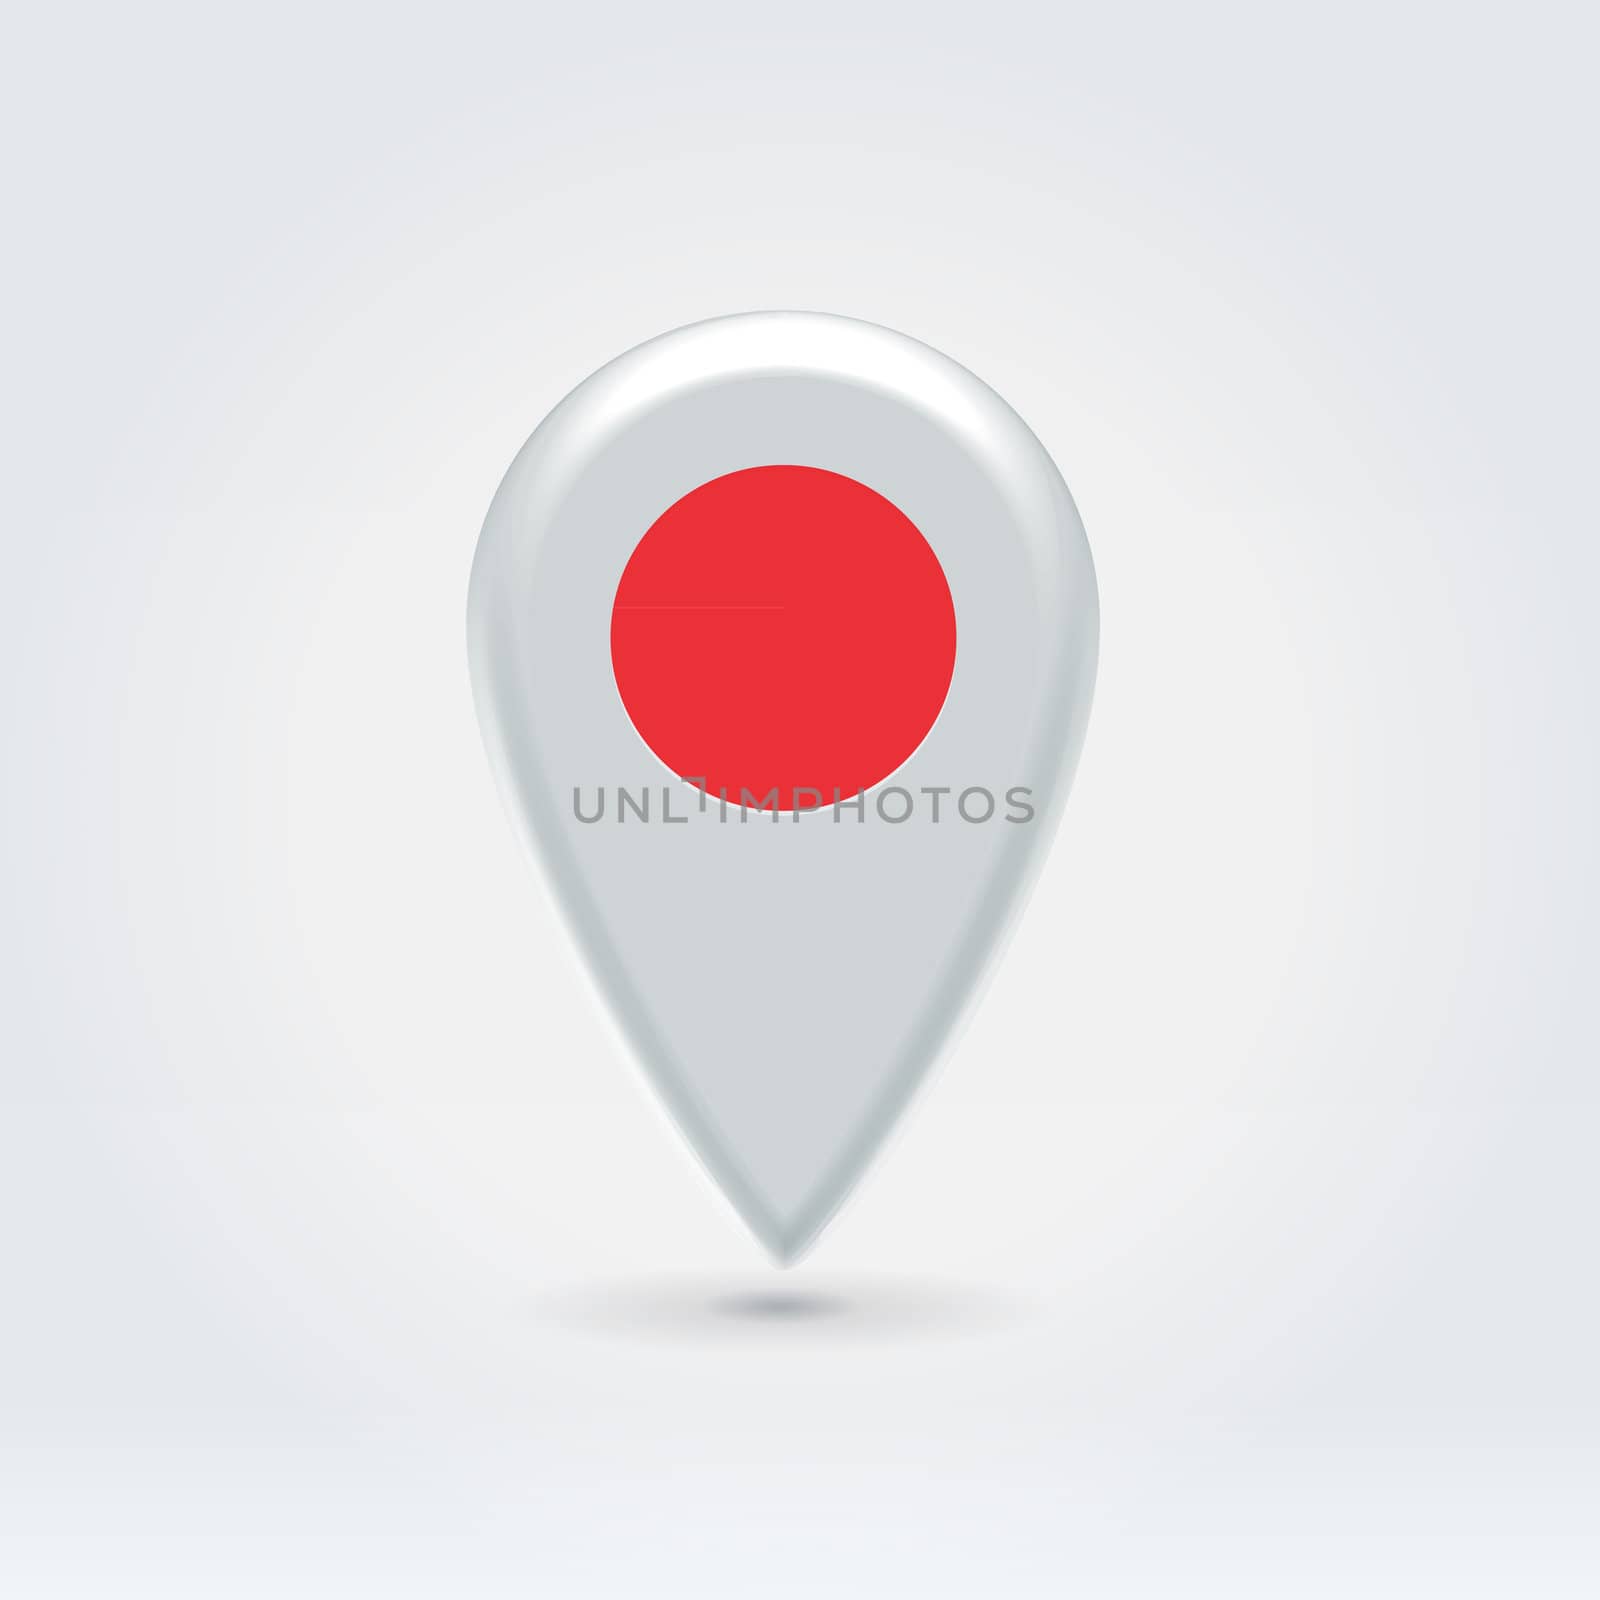 Glossy colorful Japan map application point label symbol hanging over enlightened background